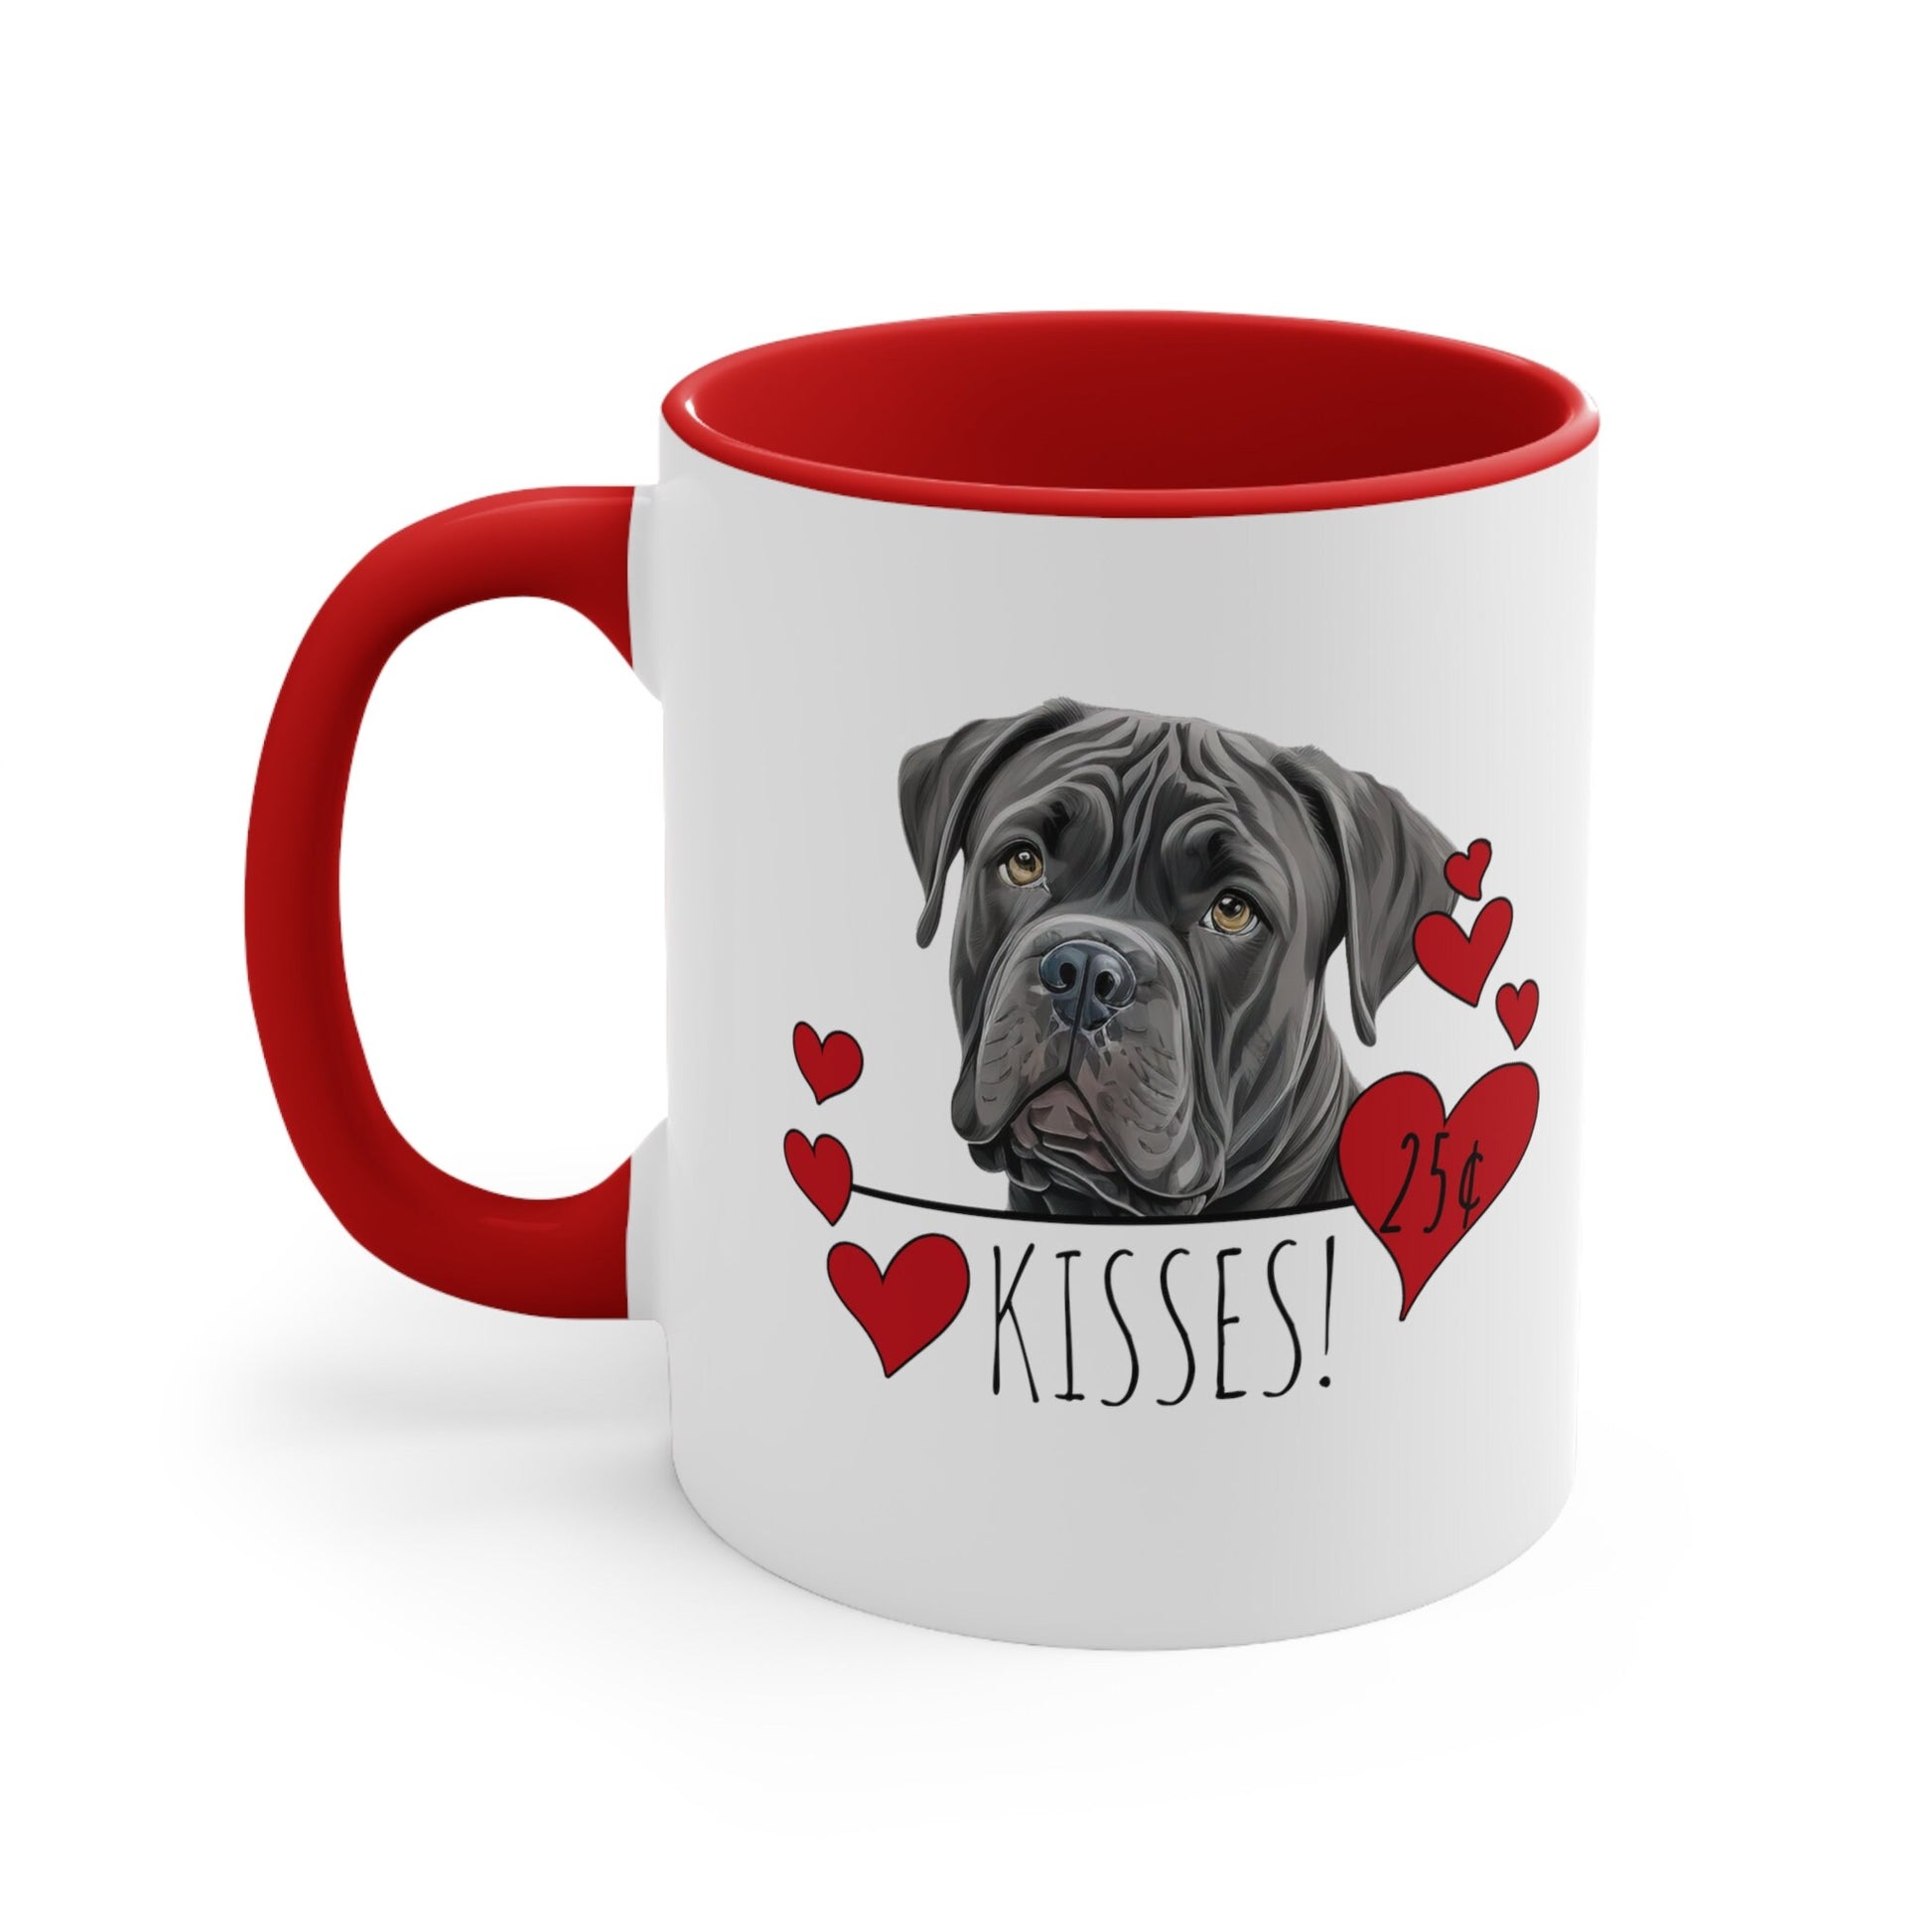 a red and white coffee mug with a picture of a dog